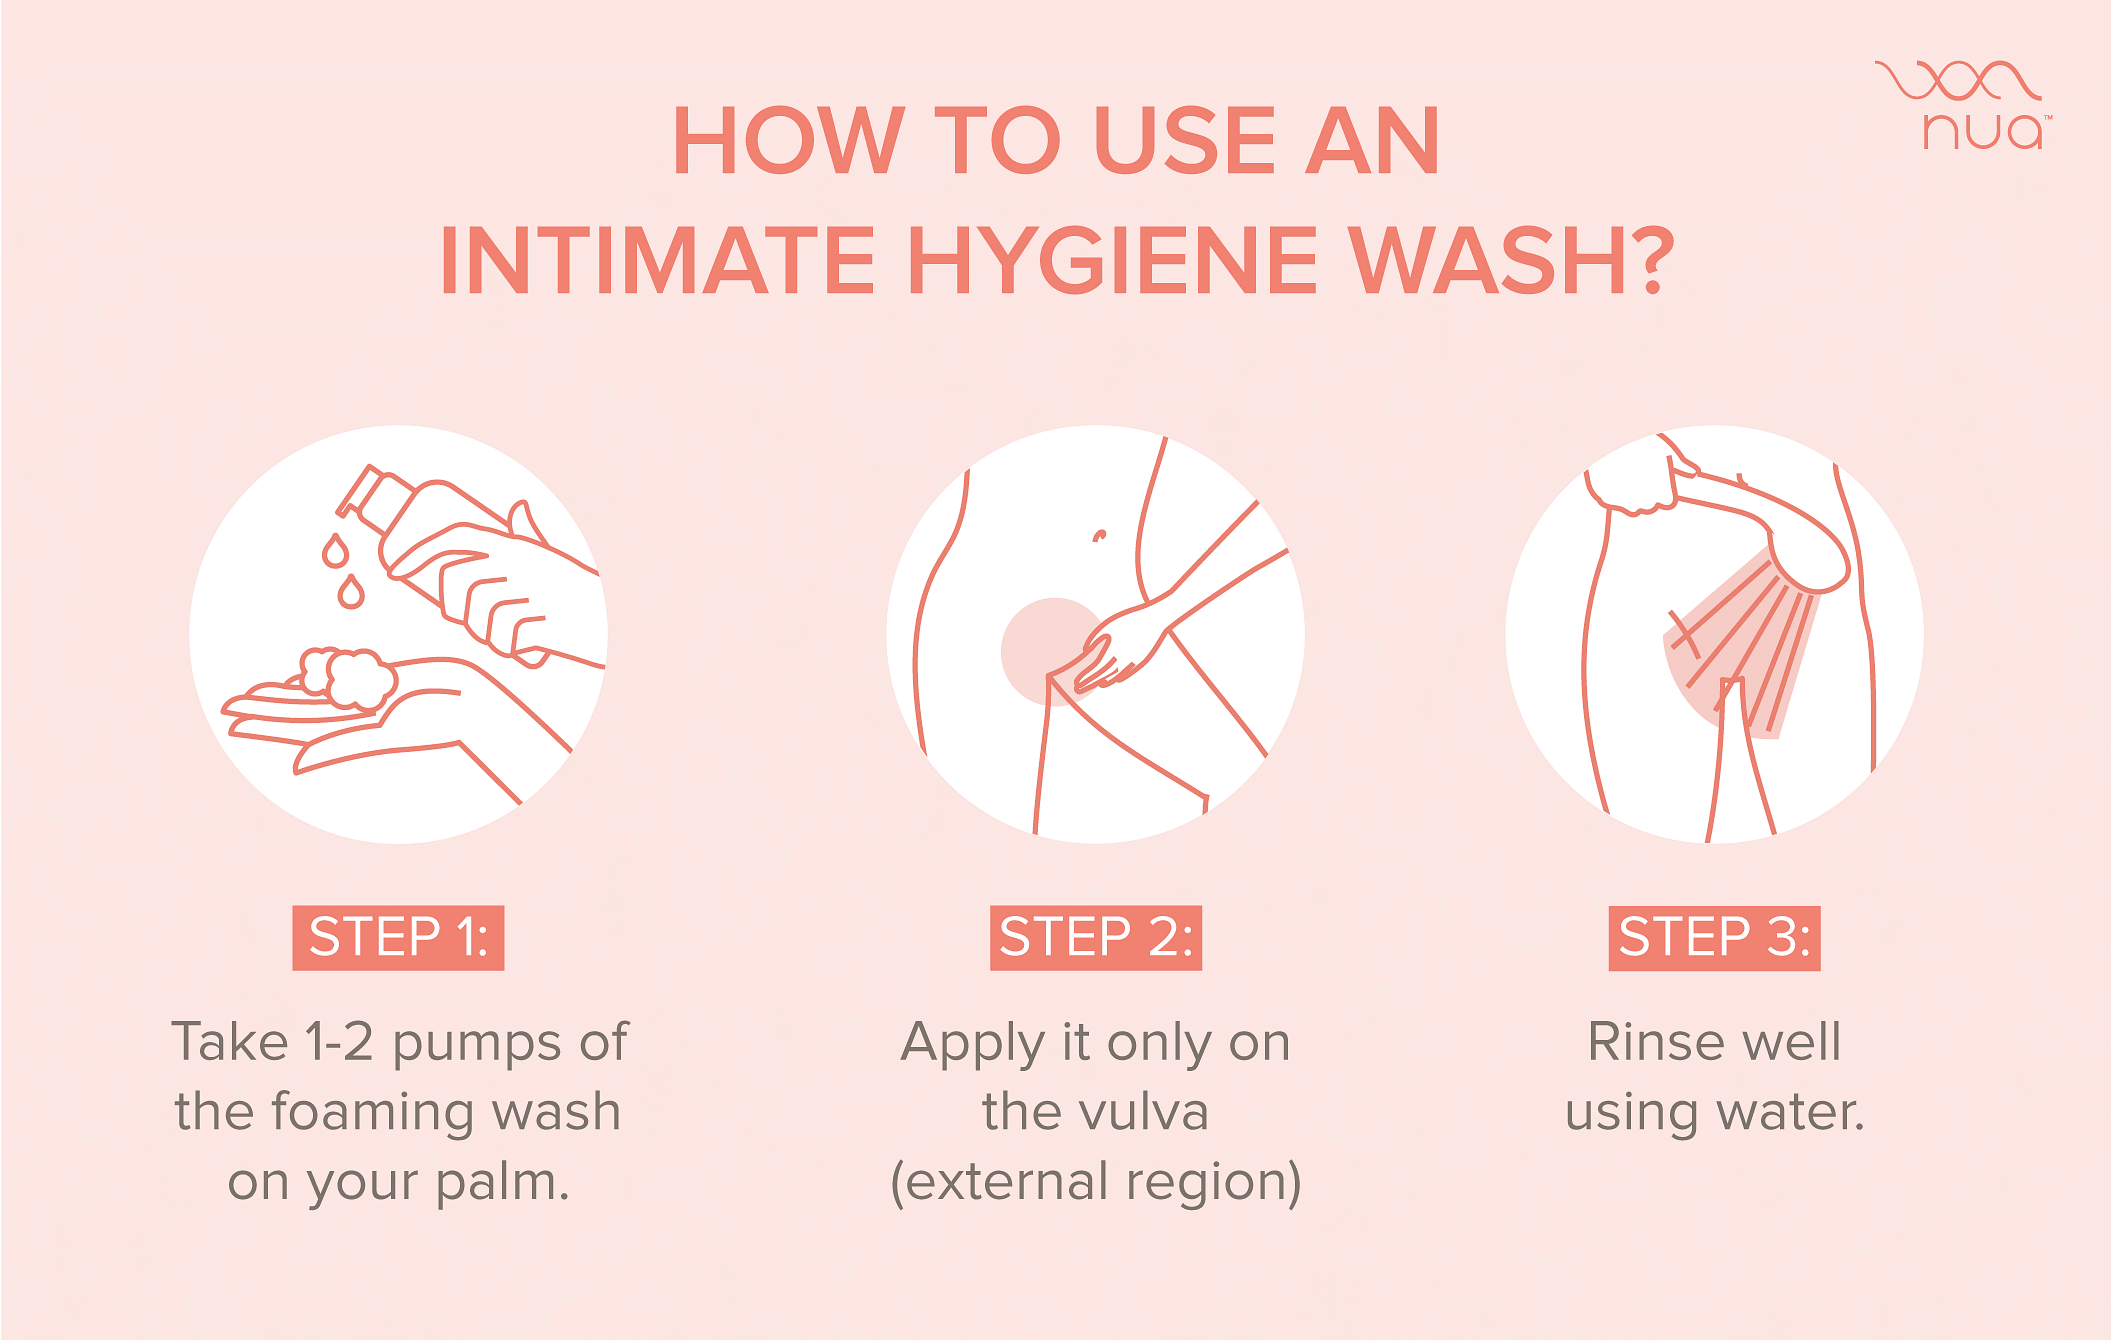 How to use an intimate hygiene wash